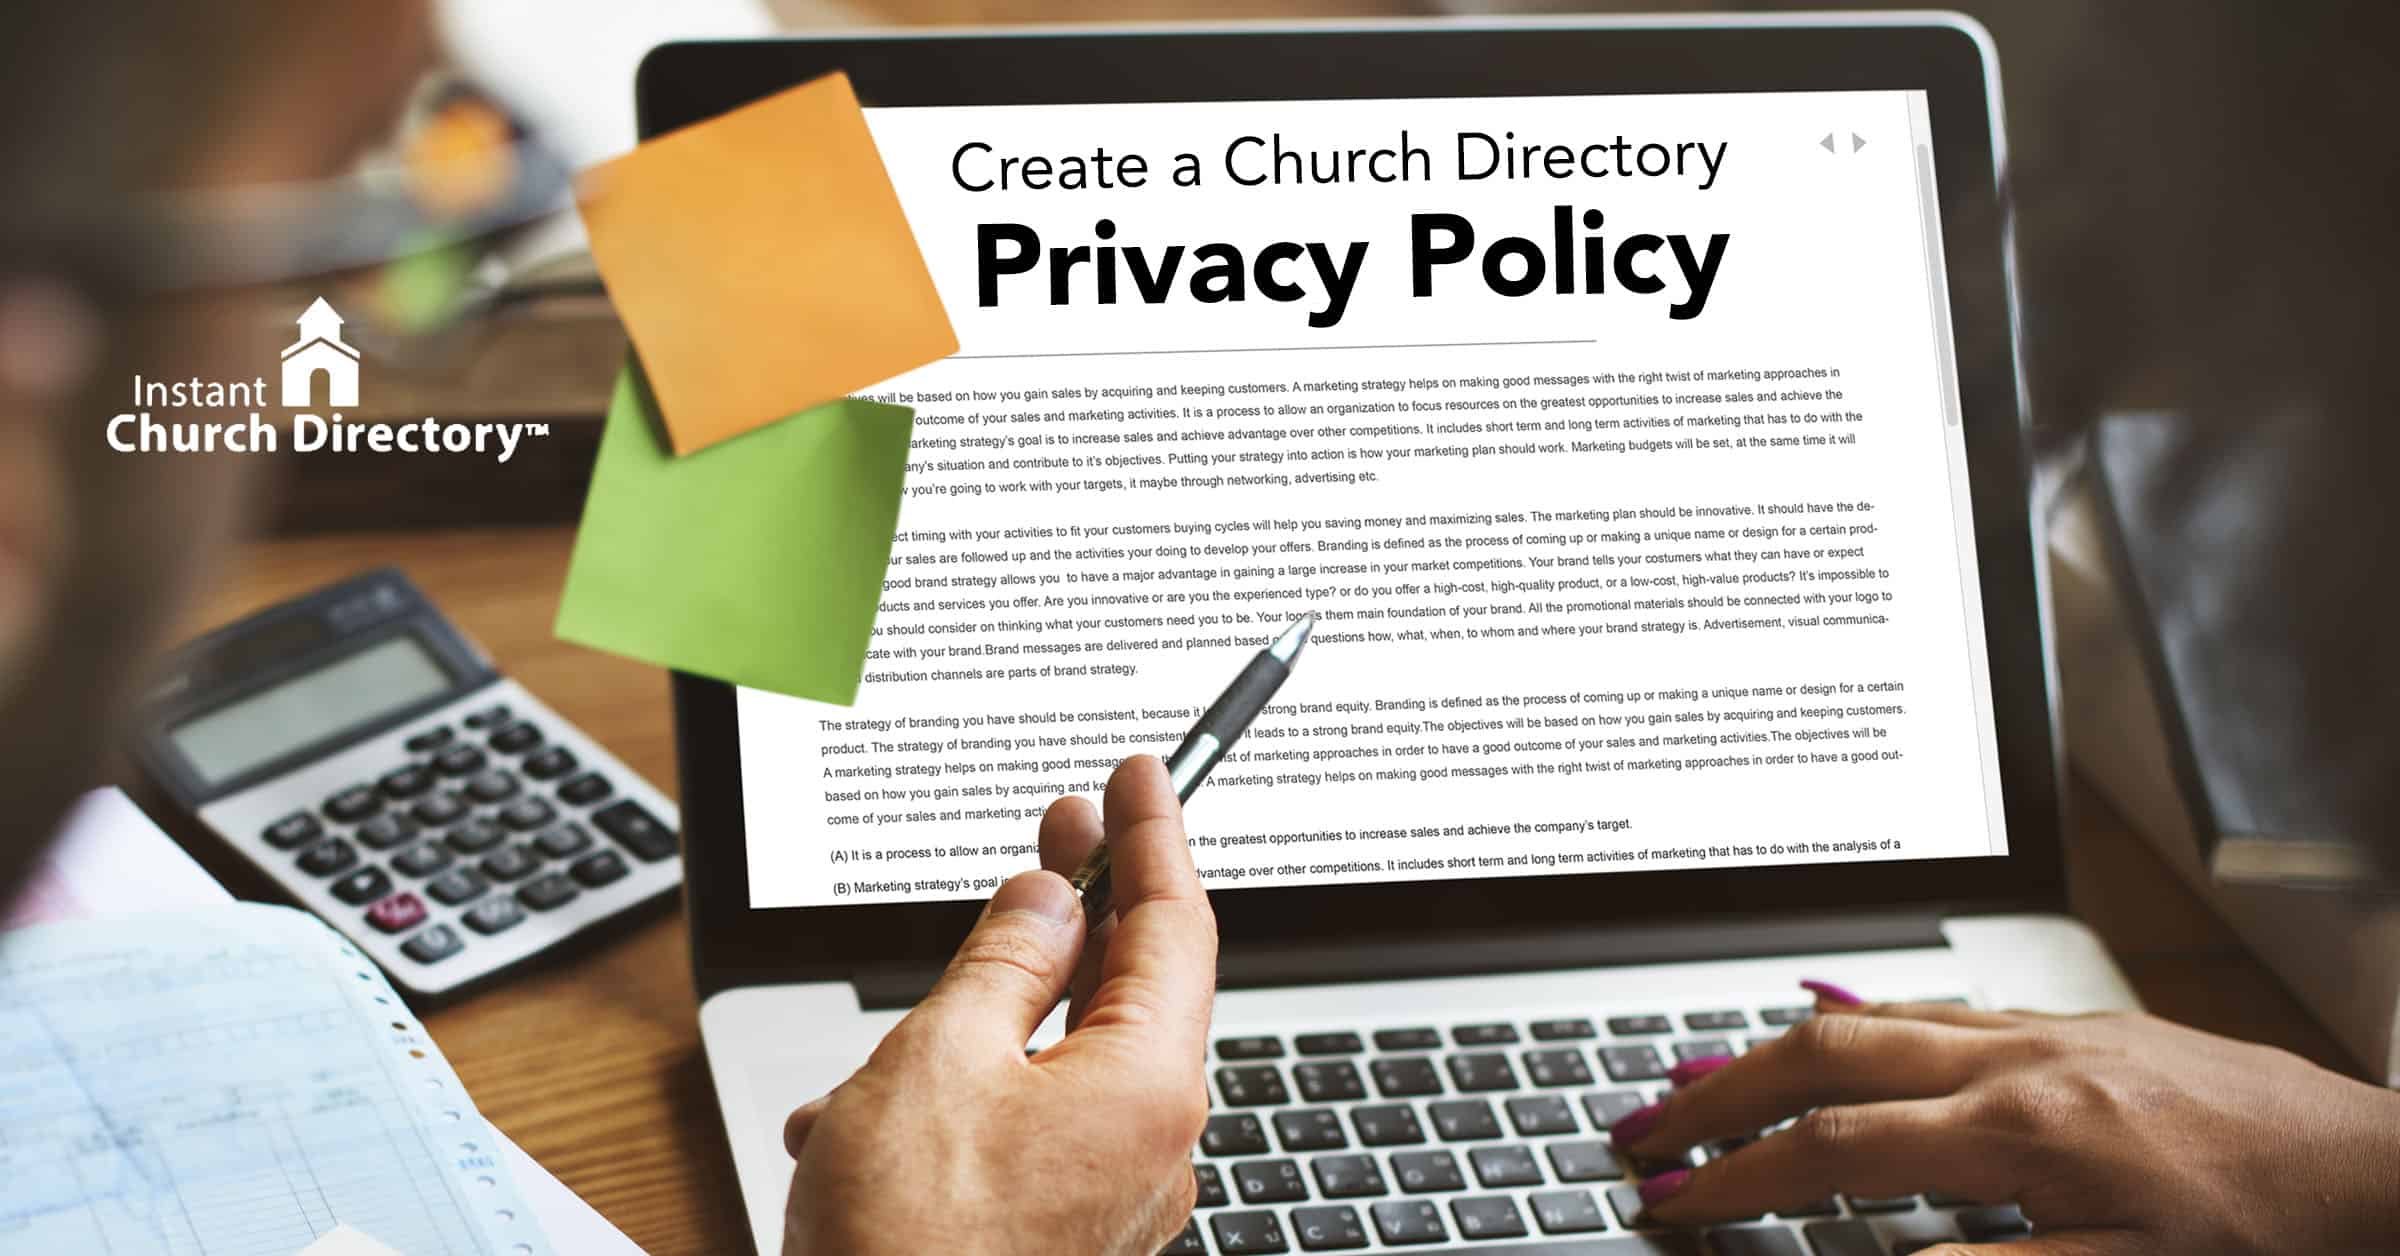 Instant-Church-Directory-Blog-Privacy-Policy-Ideas